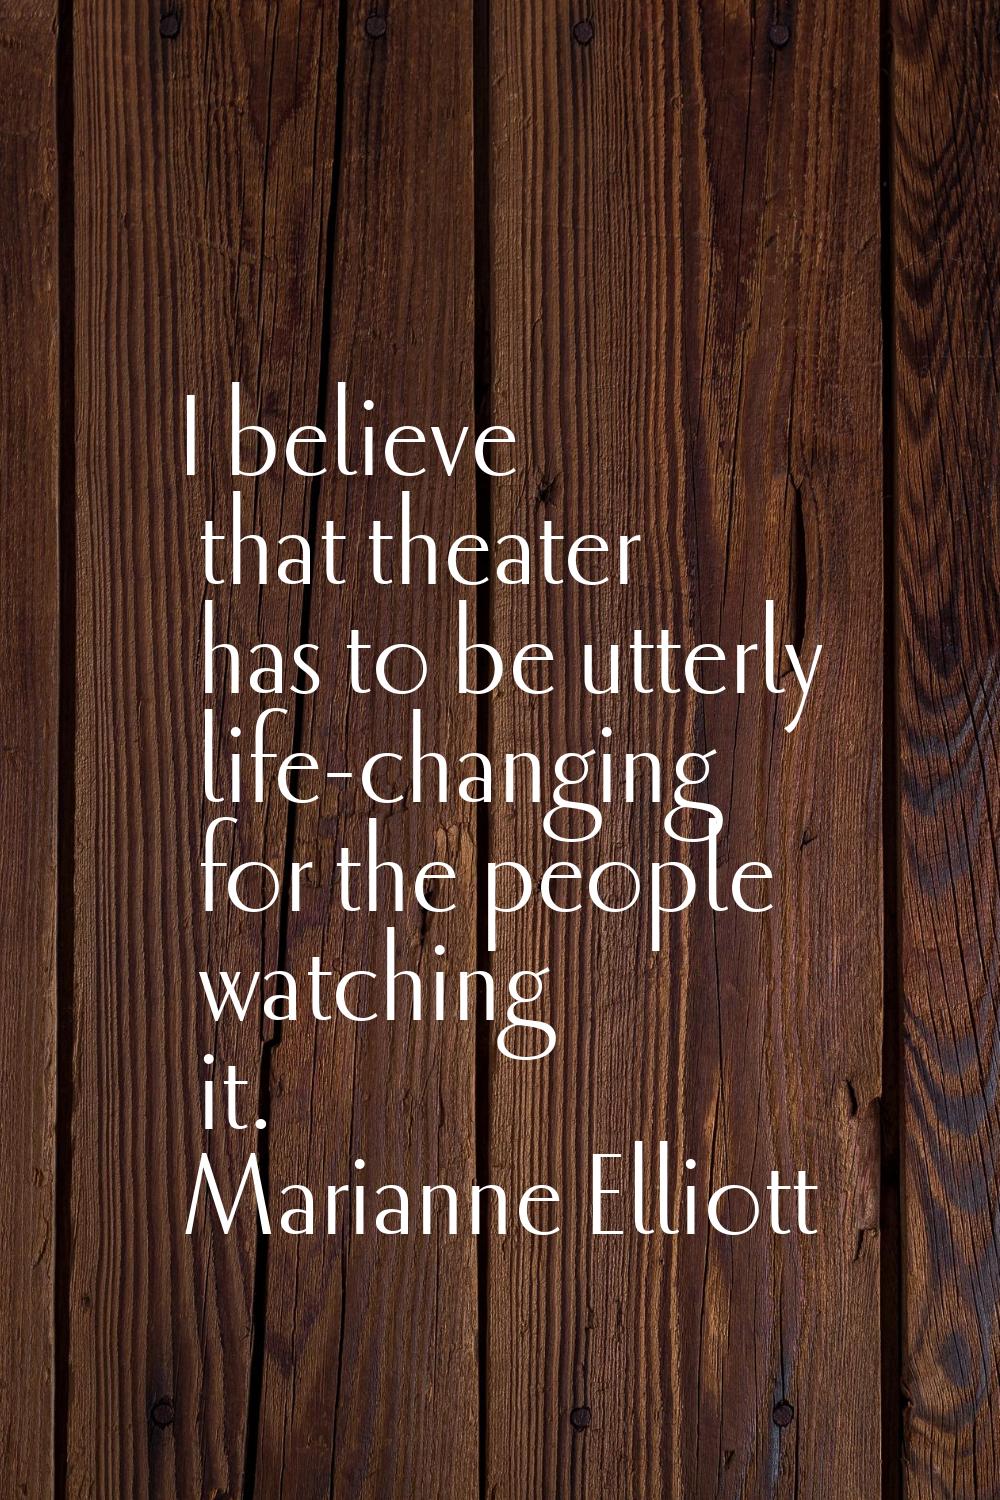 I believe that theater has to be utterly life-changing for the people watching it.